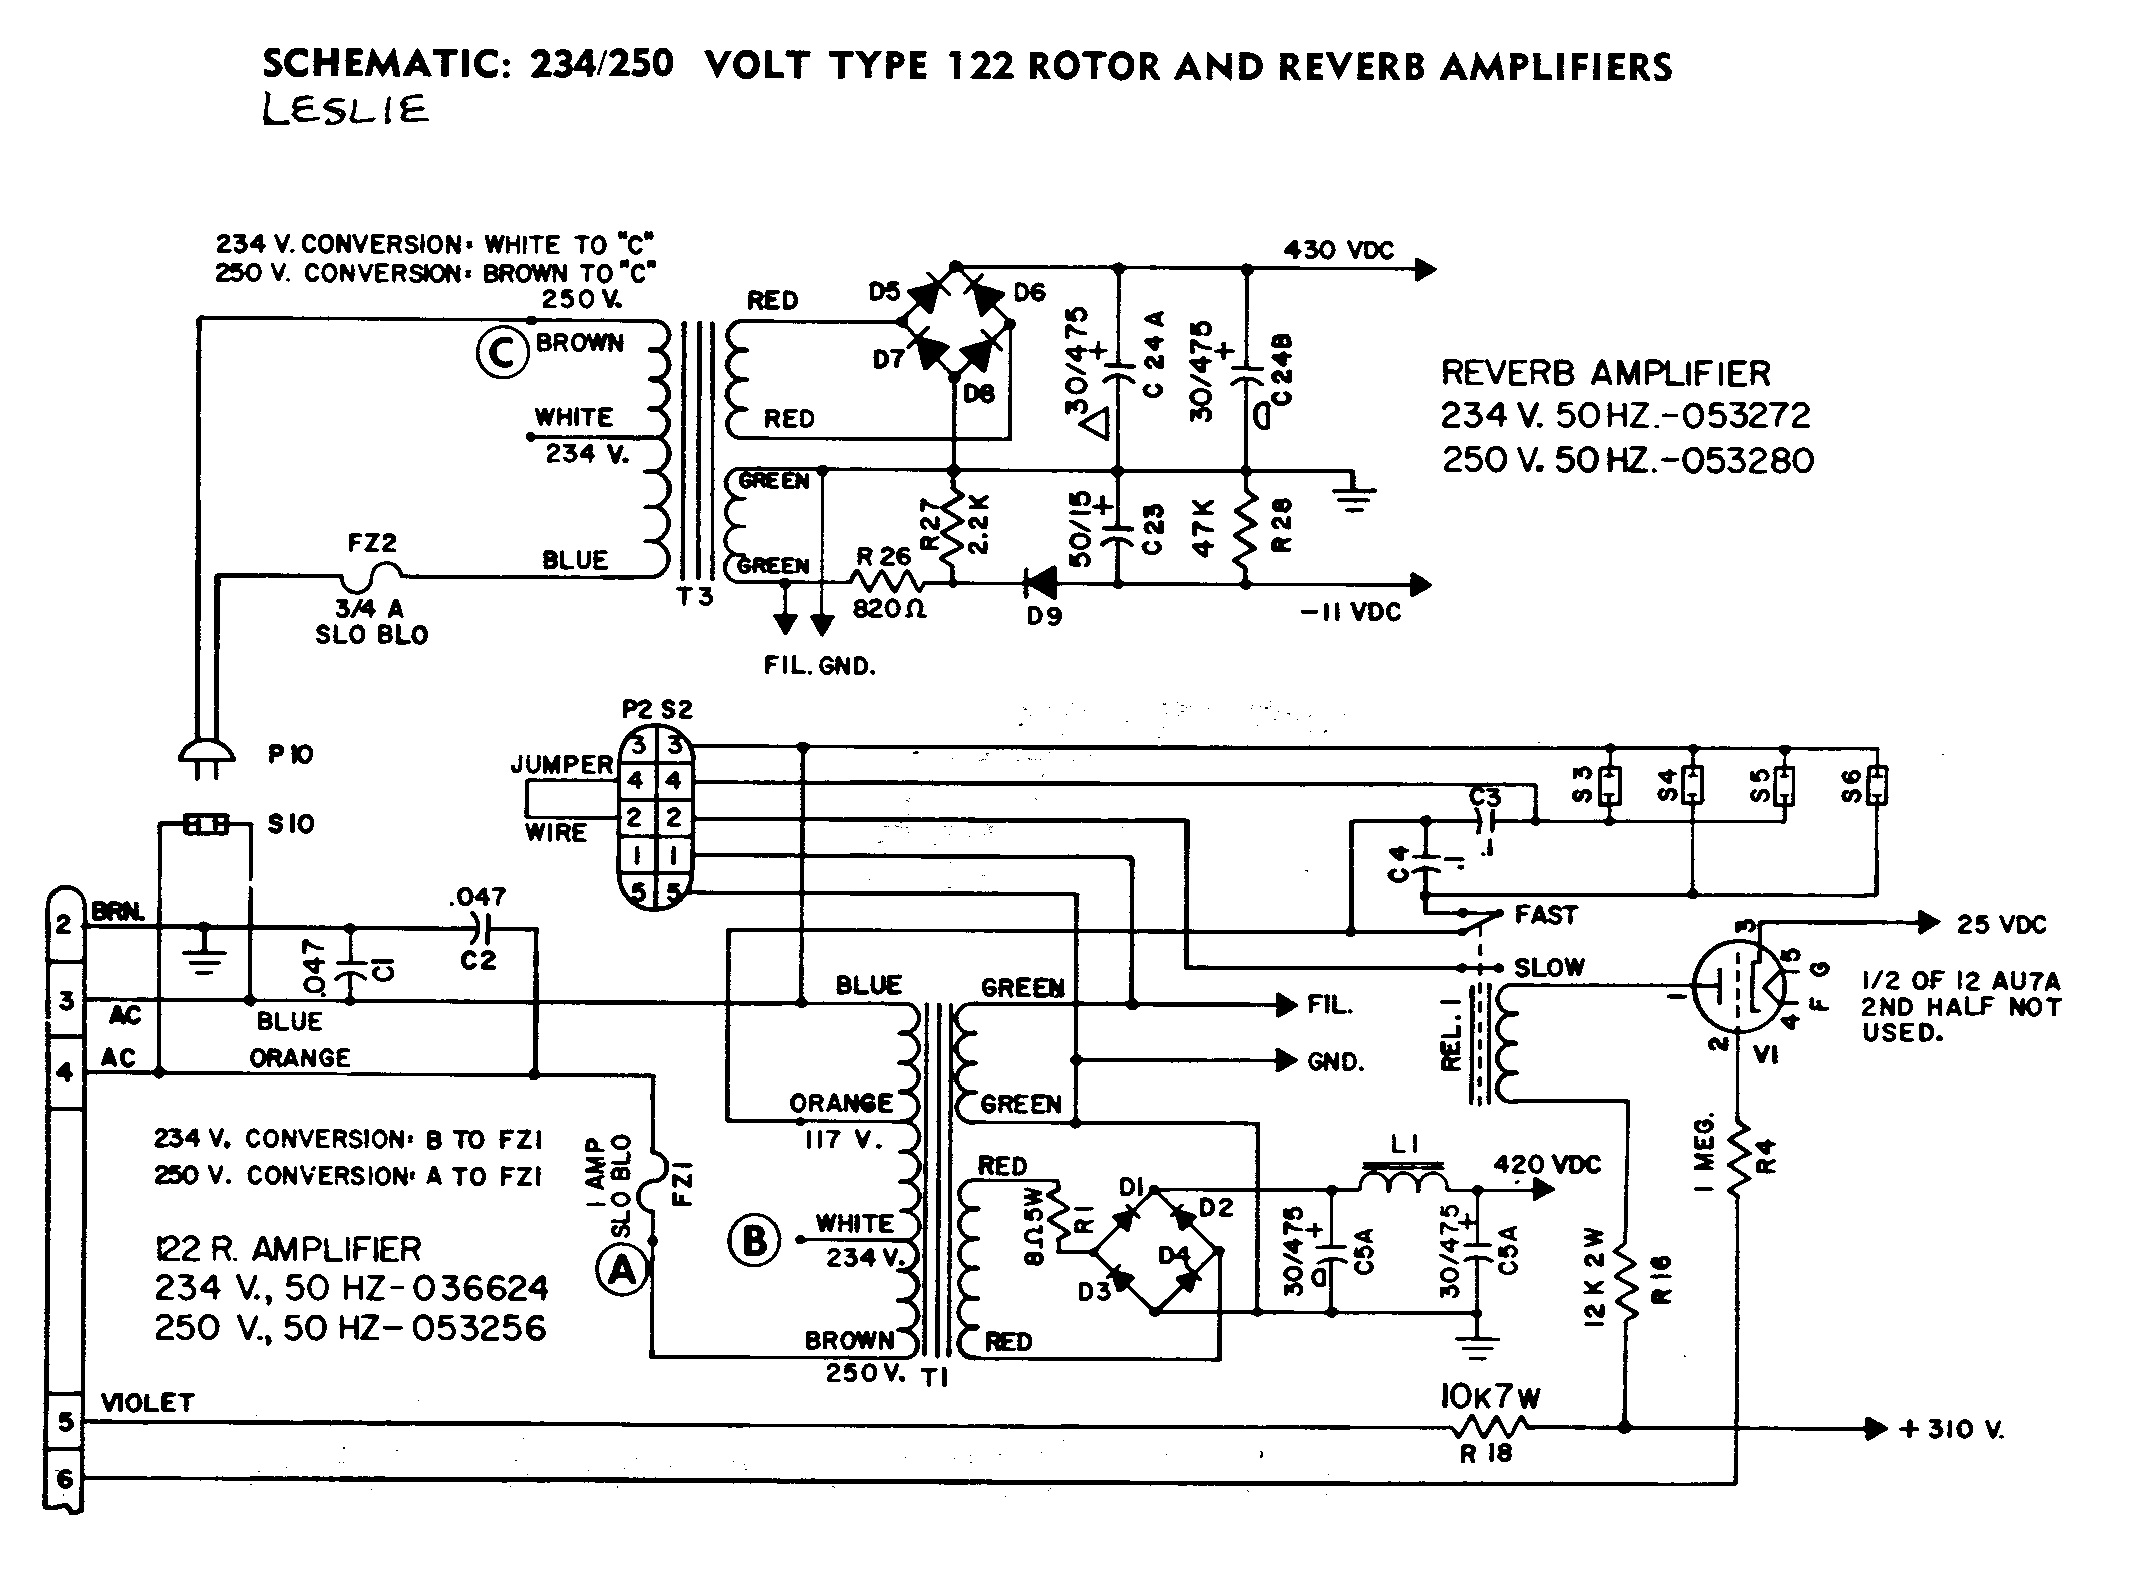 Leslie 122 Rotor and Reverb Power Supply Schematic